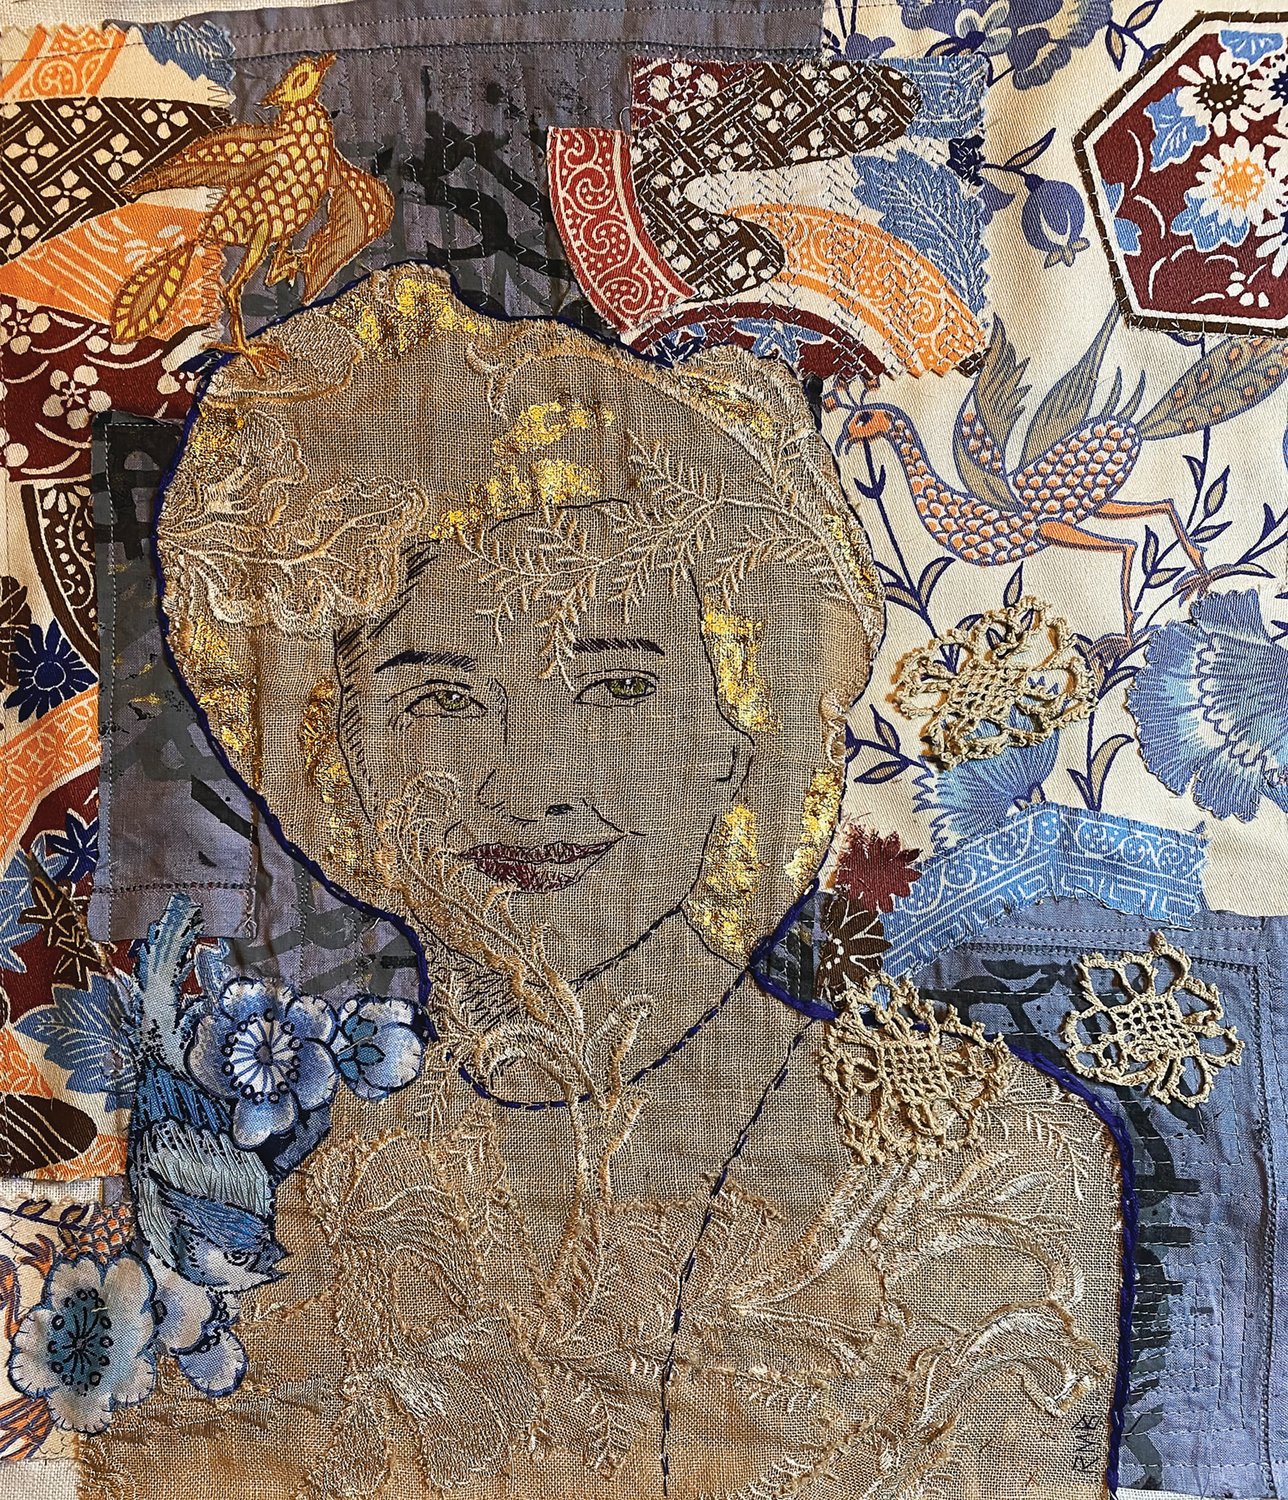 Reena Brooks’ fabric creation, “Her Strength Comes from Her Past,” received the First Place Award in AOY’s 11th annual Juried Show.